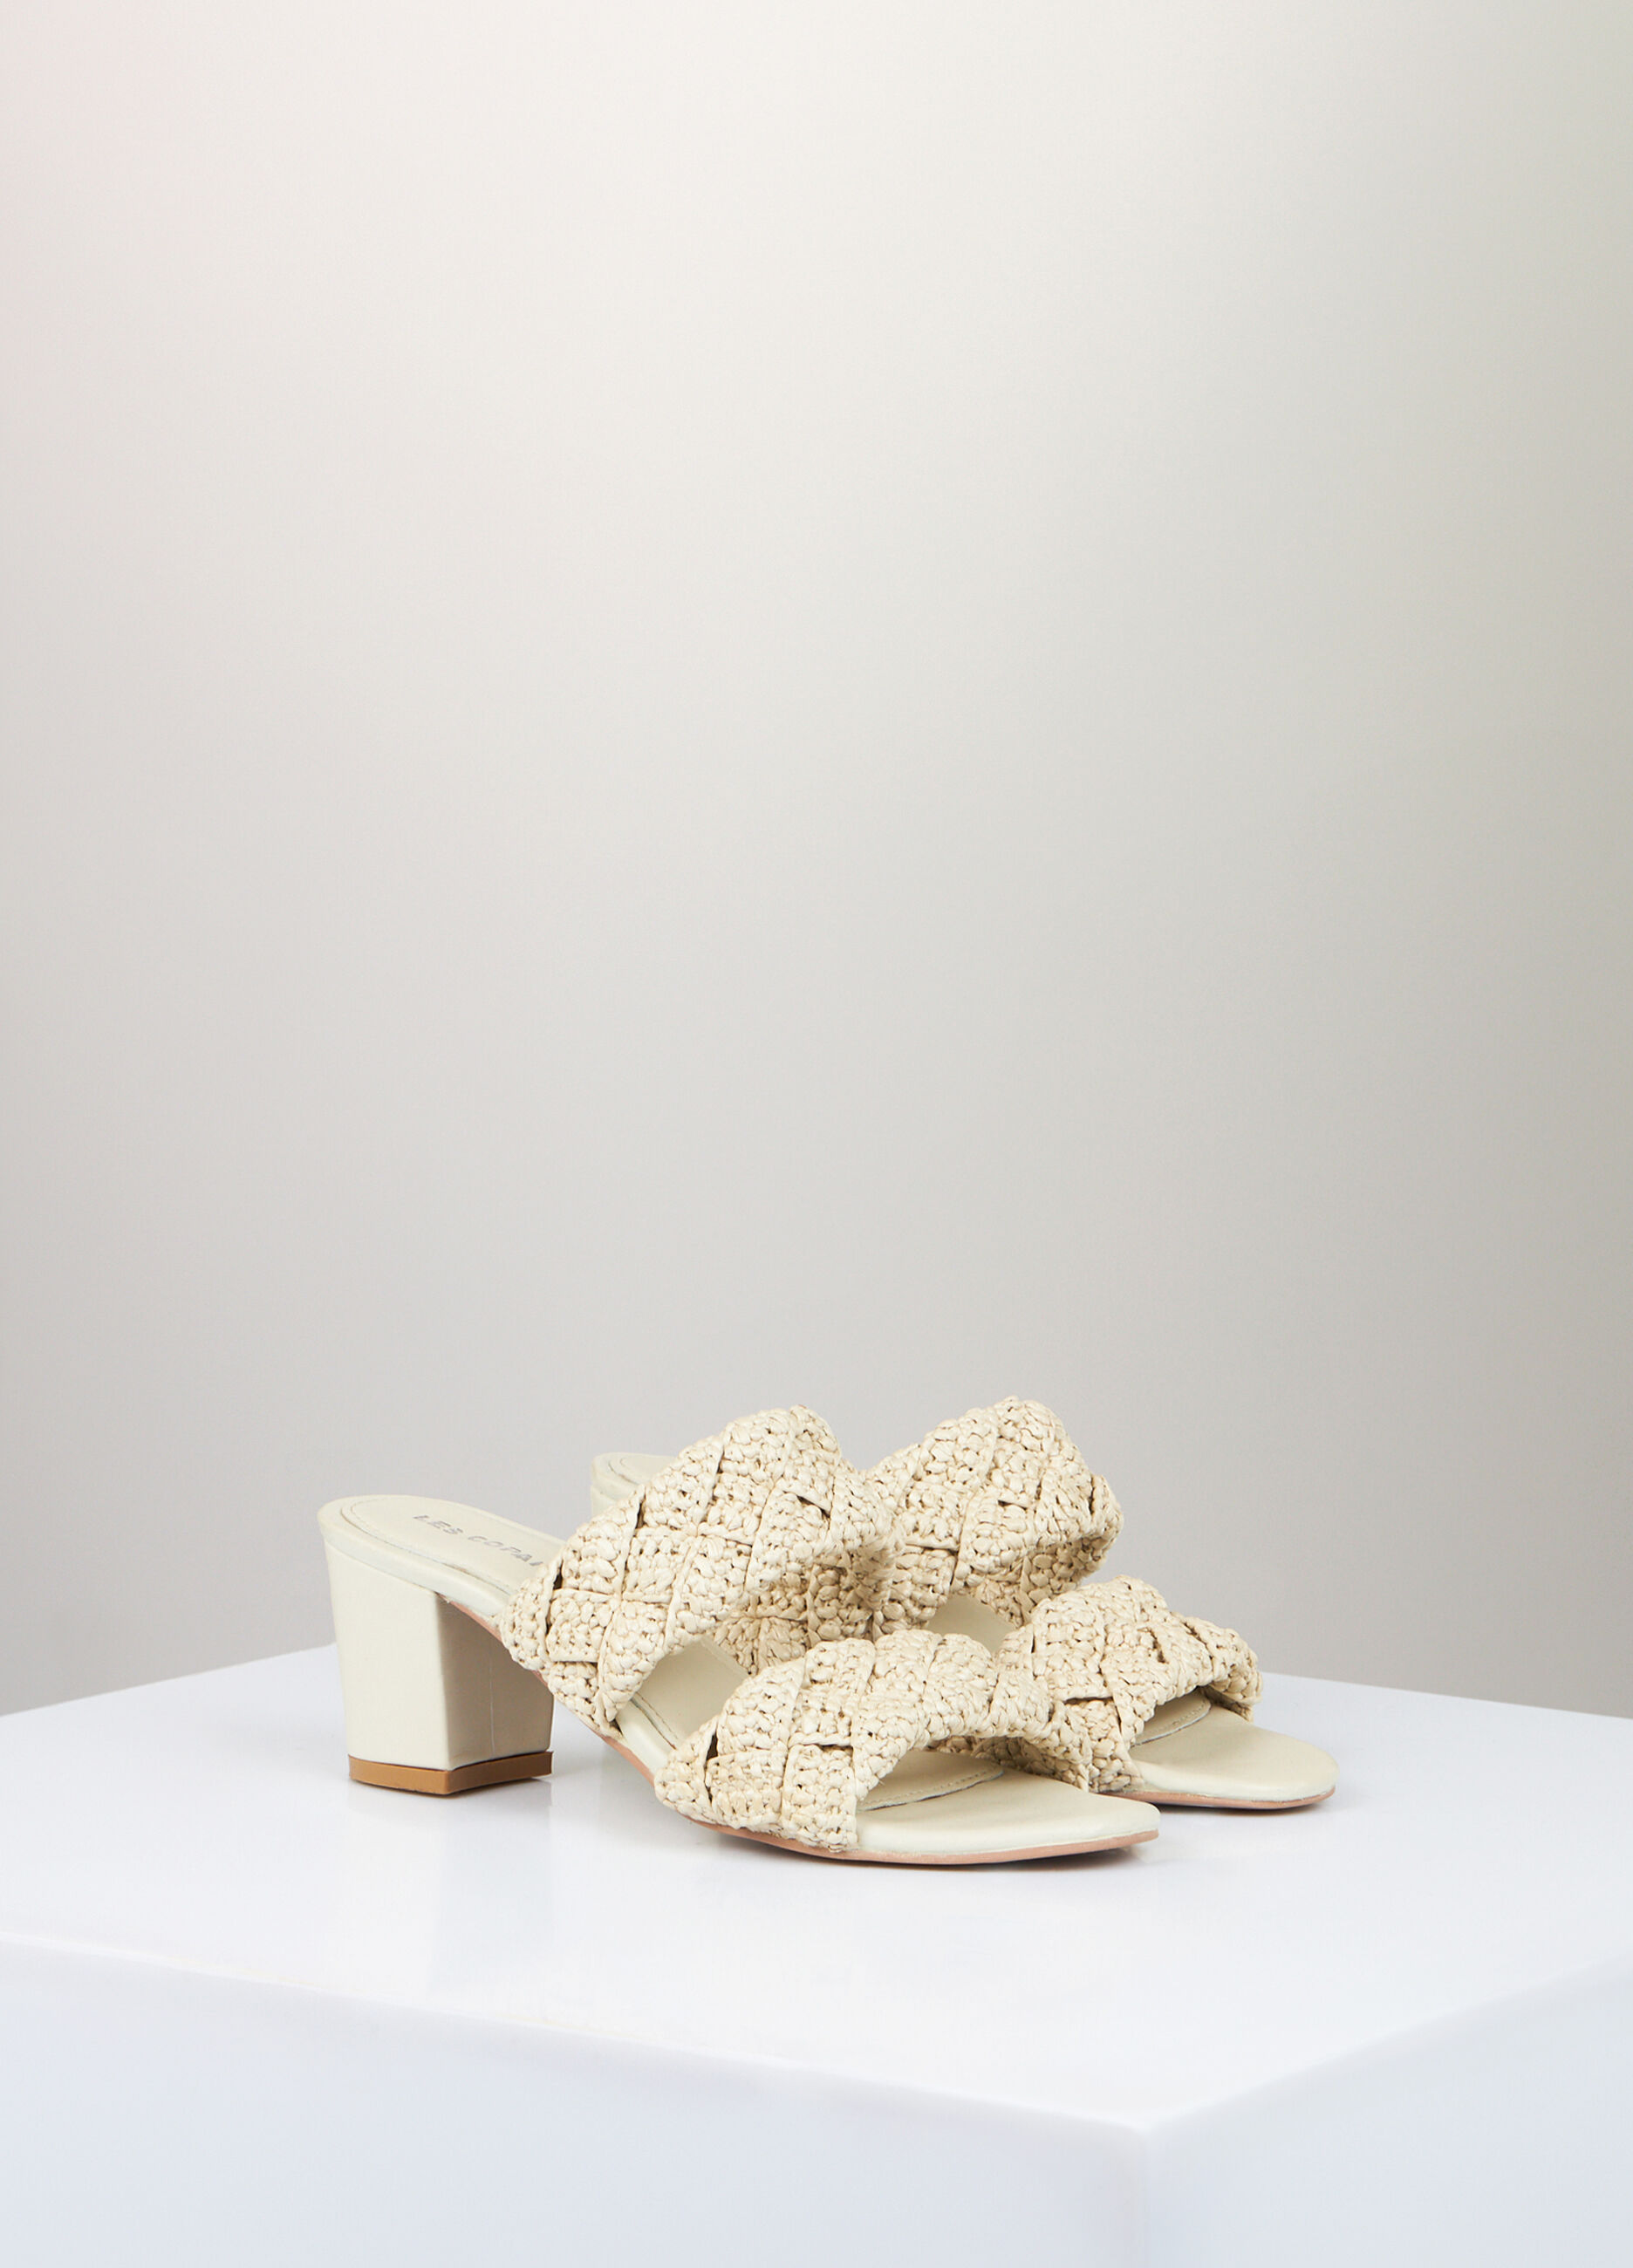 Band sandals in leather and raffia